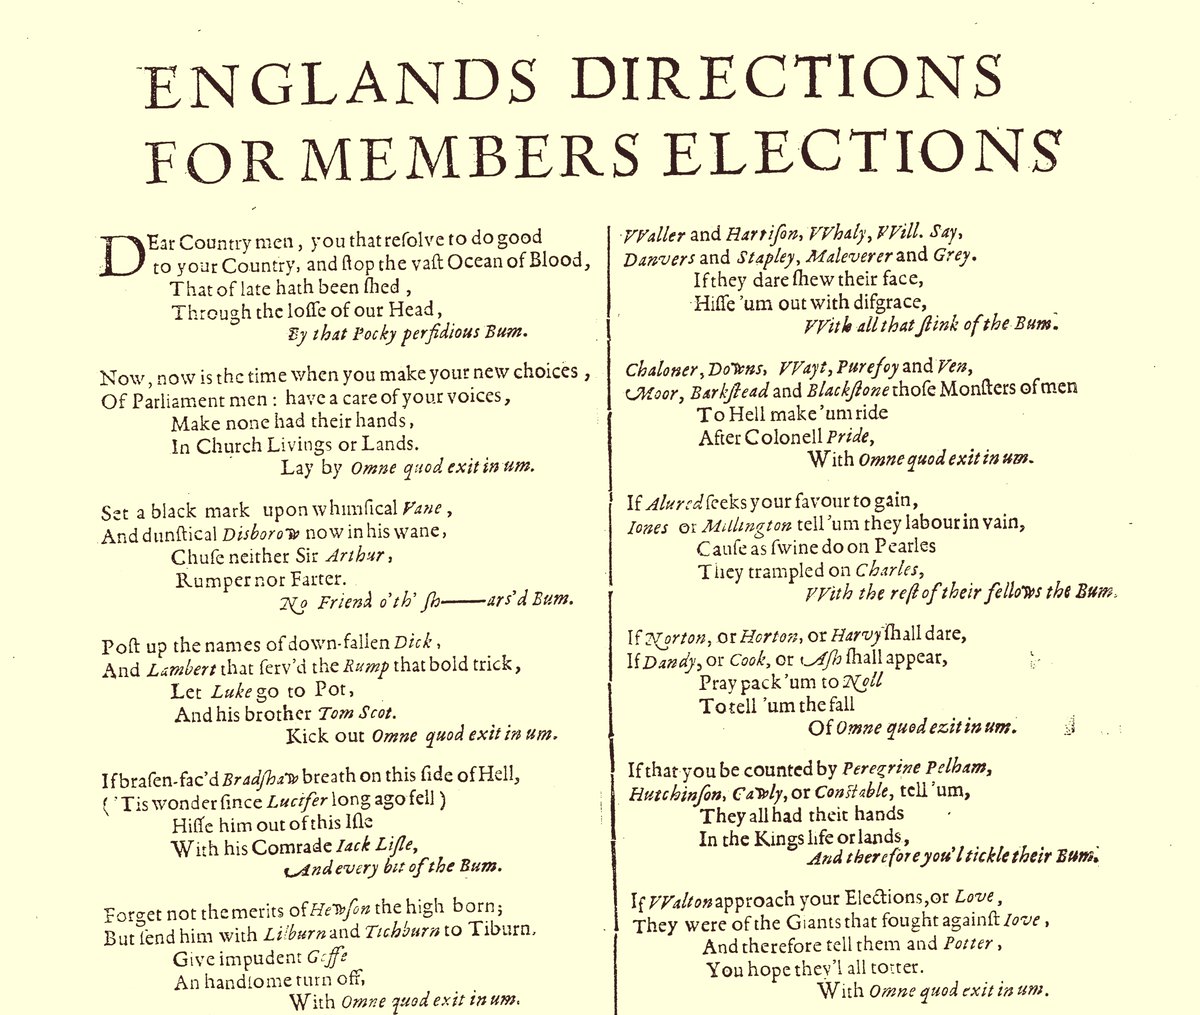 Englands Directions for Members Elections
Thomason Tracts, 1660
[I'm starting to look at early modern election songs...]
#earlymodern #17thCentury #generalelection